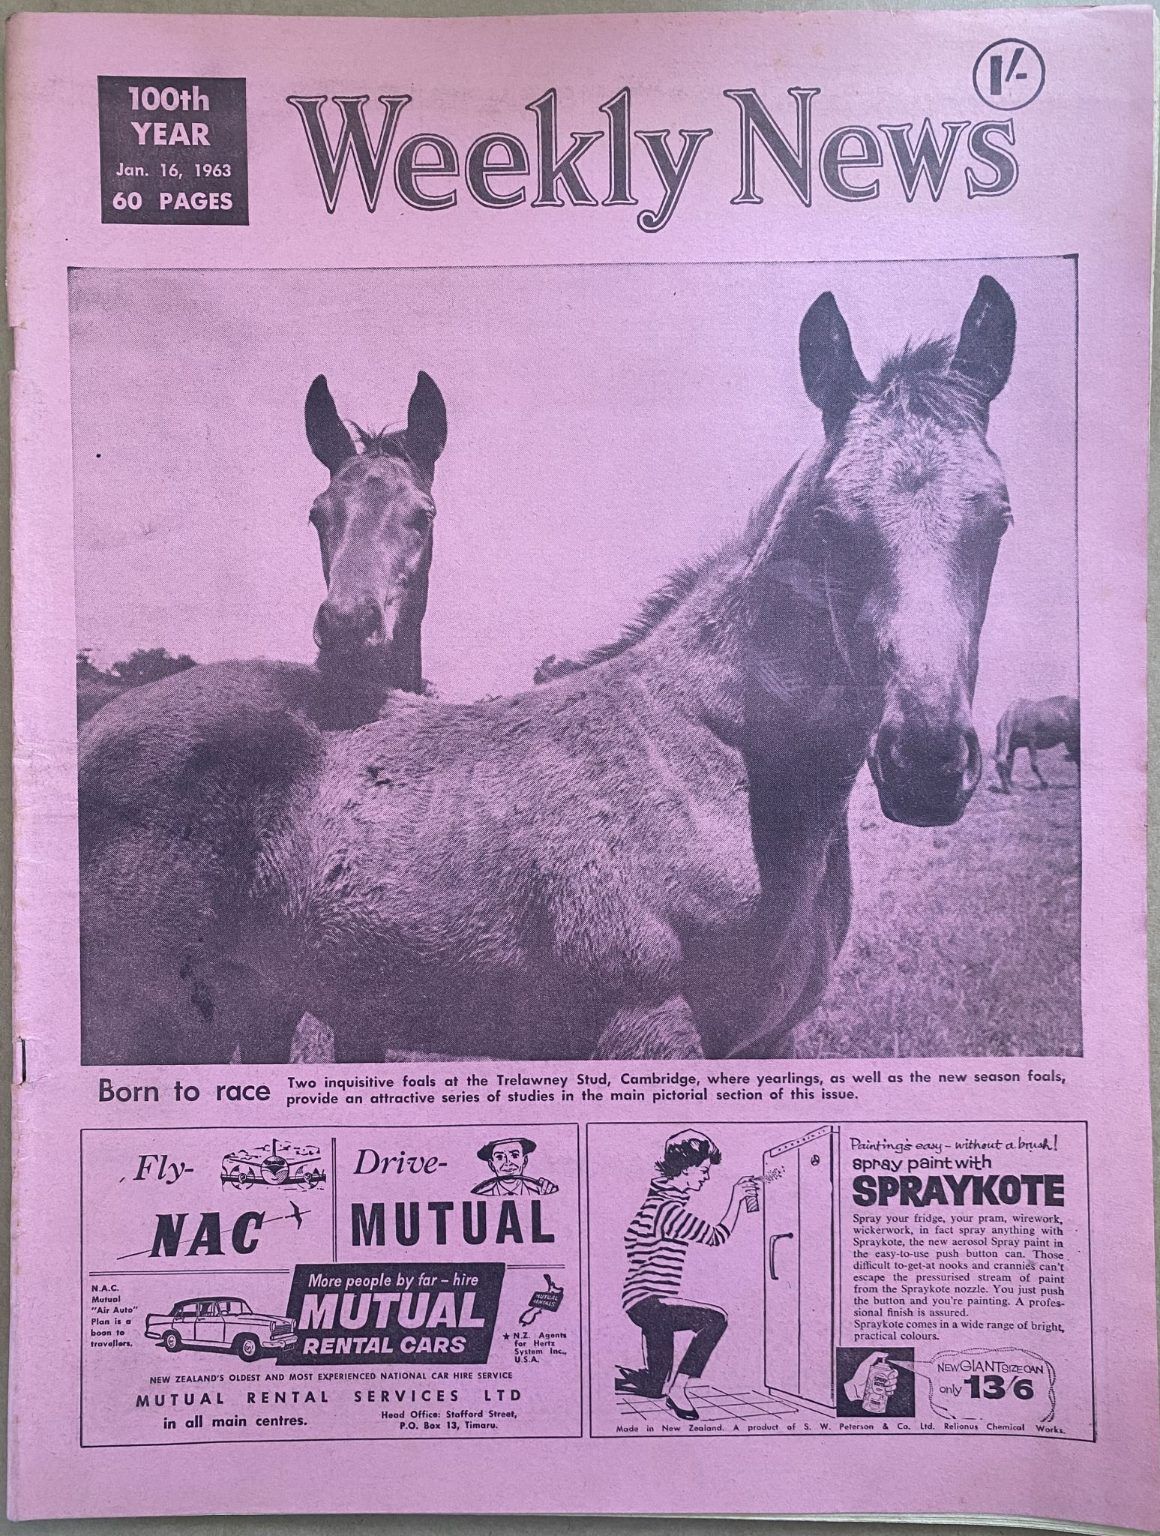 OLD NEWSPAPER: The Weekly News, No. 5173, 16 January 1963